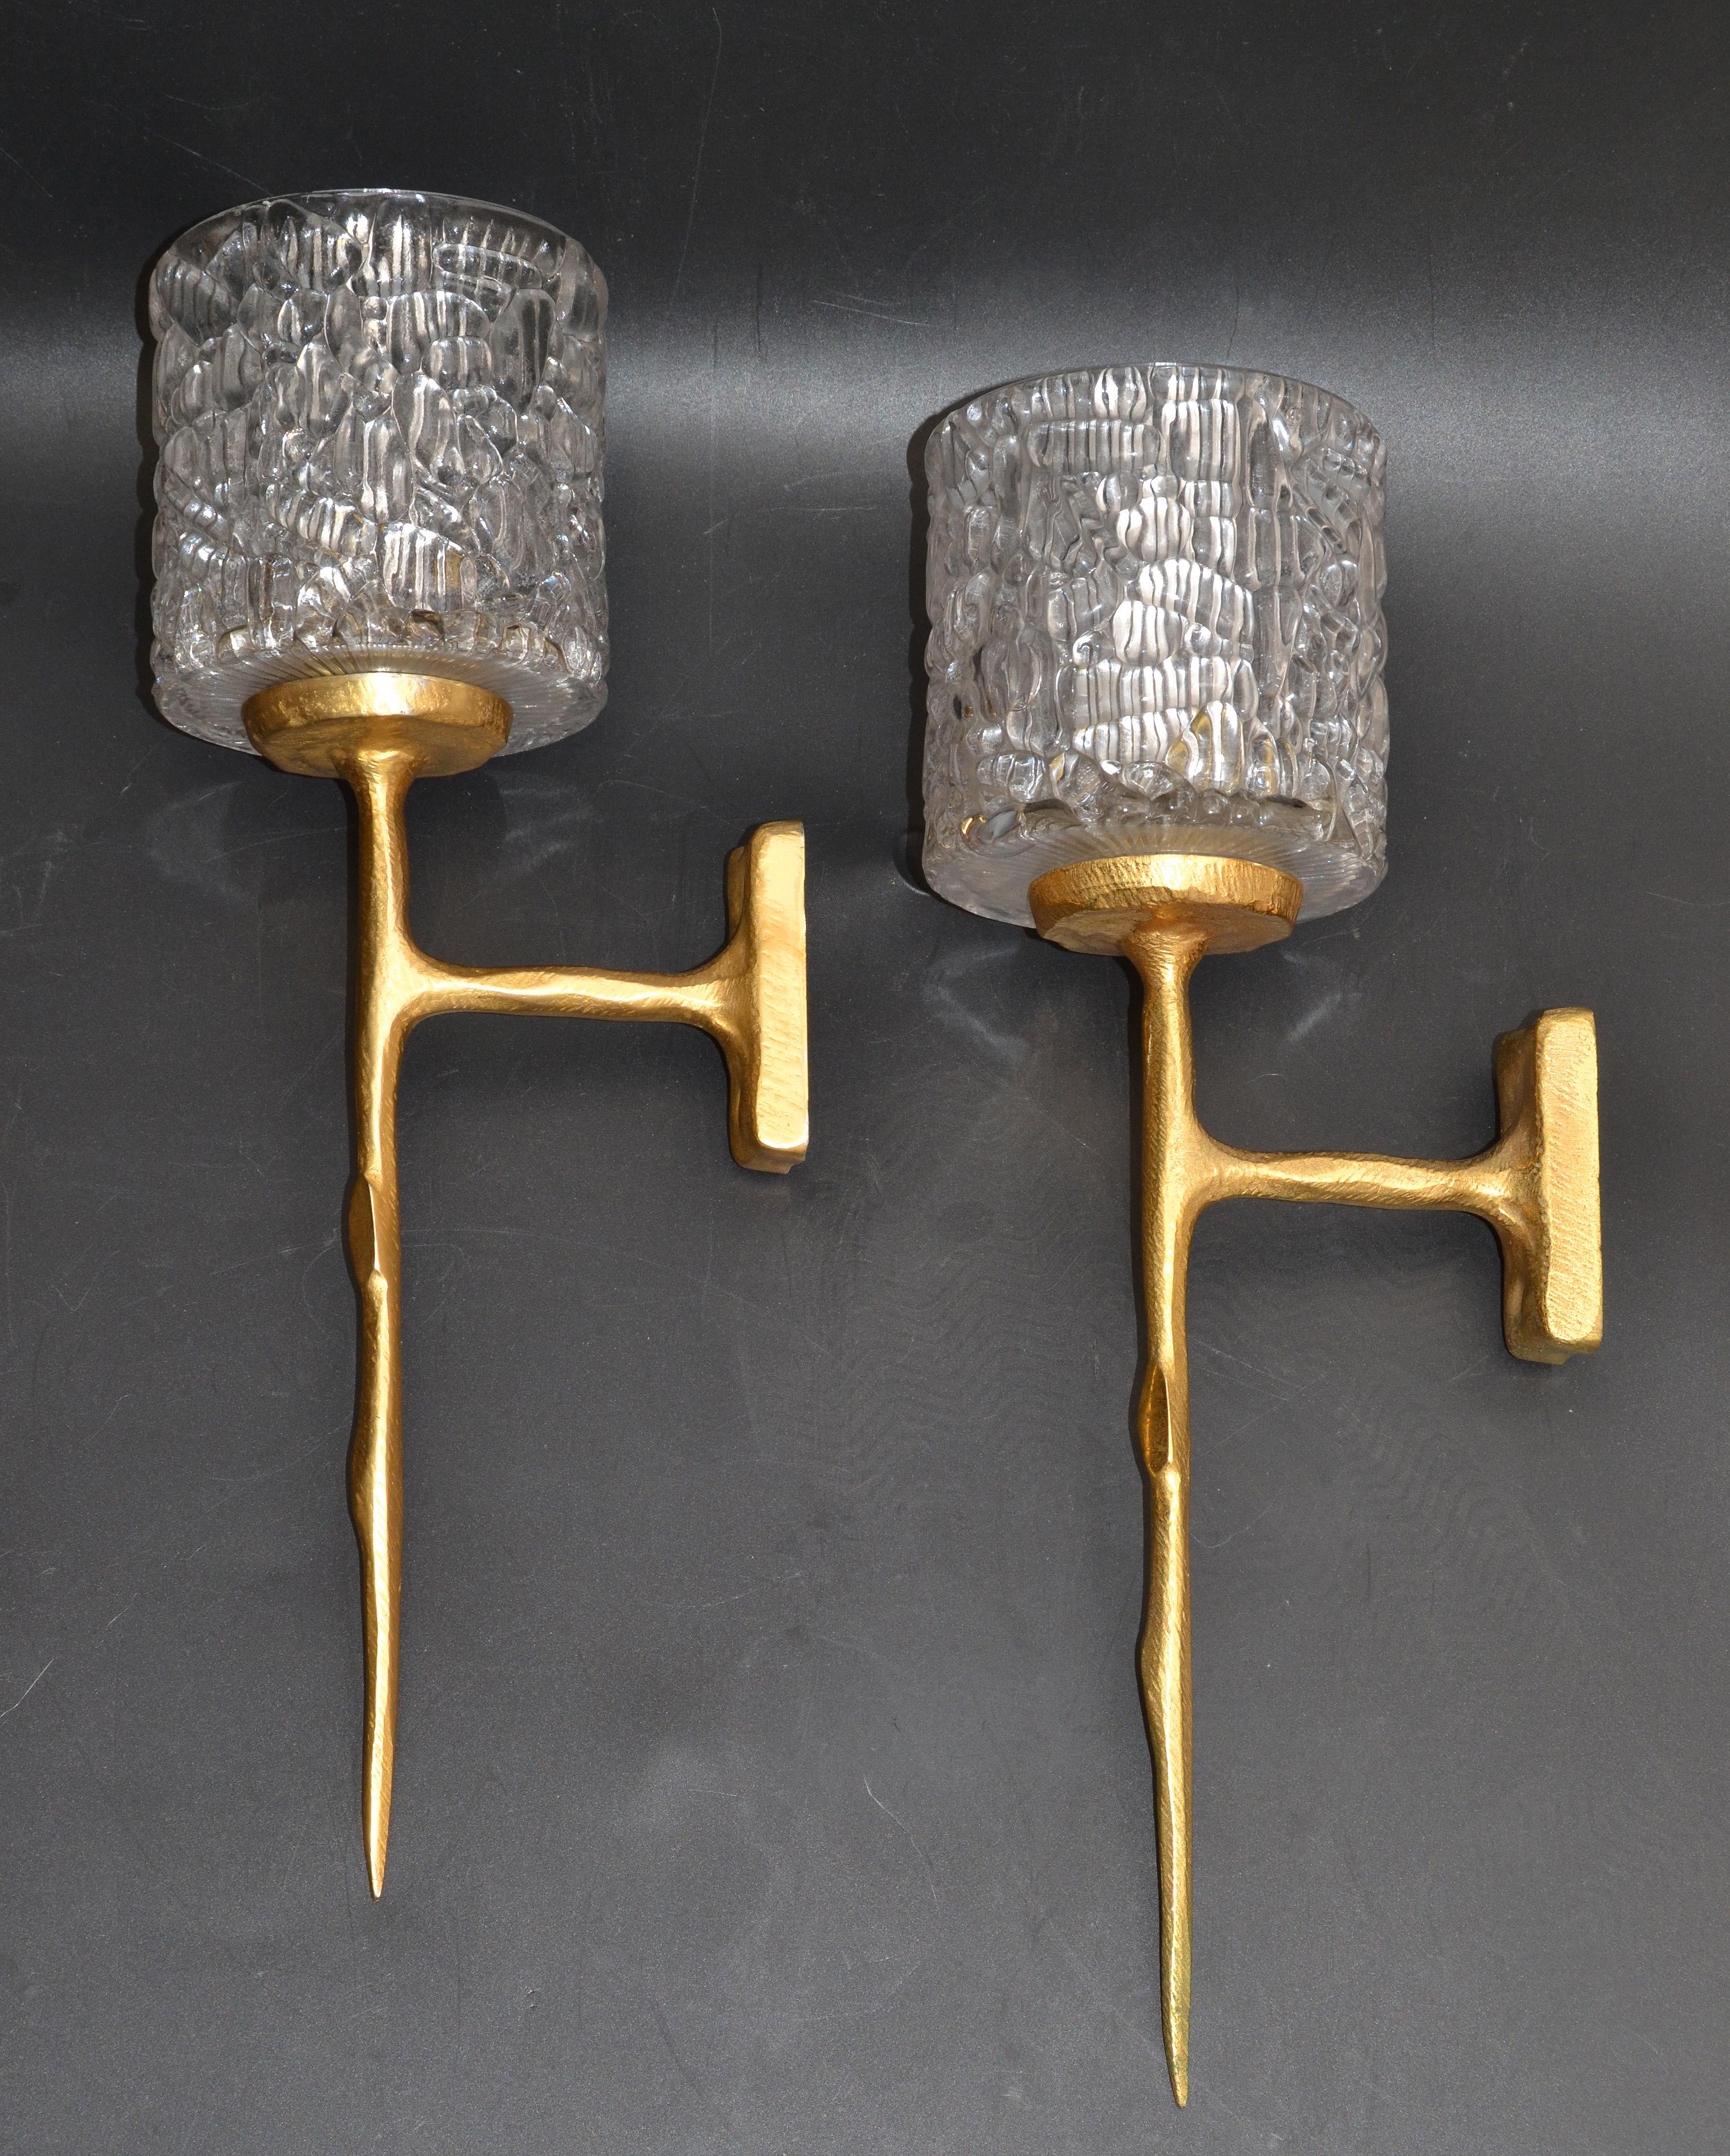 Superb pair of Agostini style bronze sconces for Maison Arlus with cut crystal glass shades.
Each wall sconce takes 1 light bulb with max. 60 watt.
In perfect working condition. Projection from the wall: 7 inches.
Glass Shade measure: Diameter: